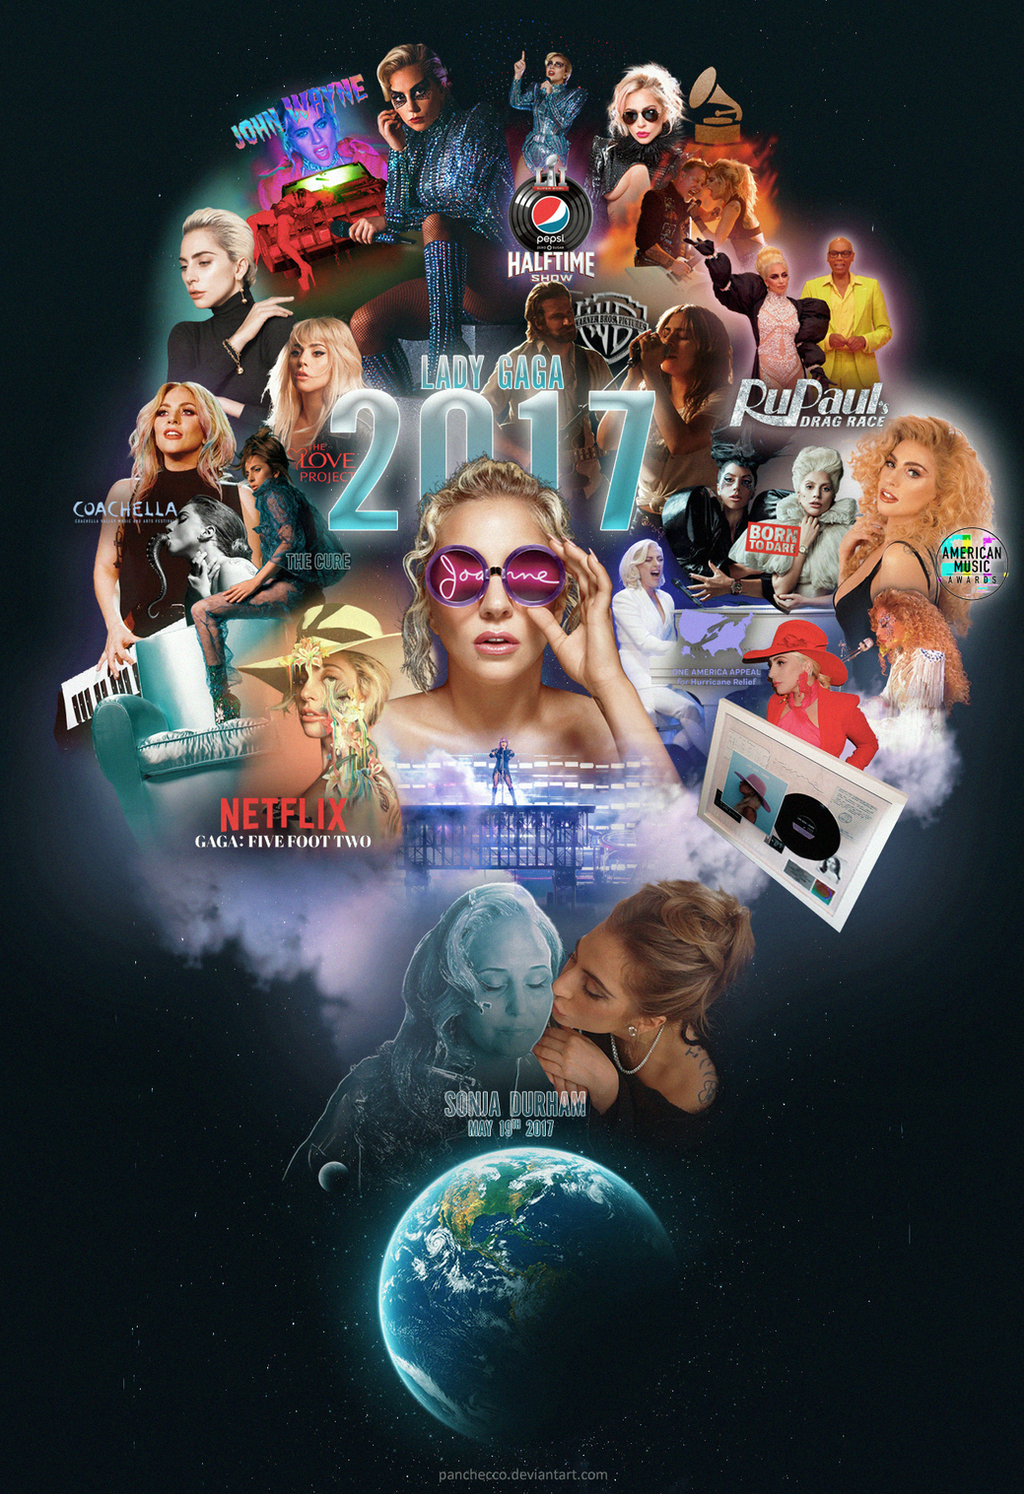 lady_gaga_in_2017___tribute_poster_by_pa